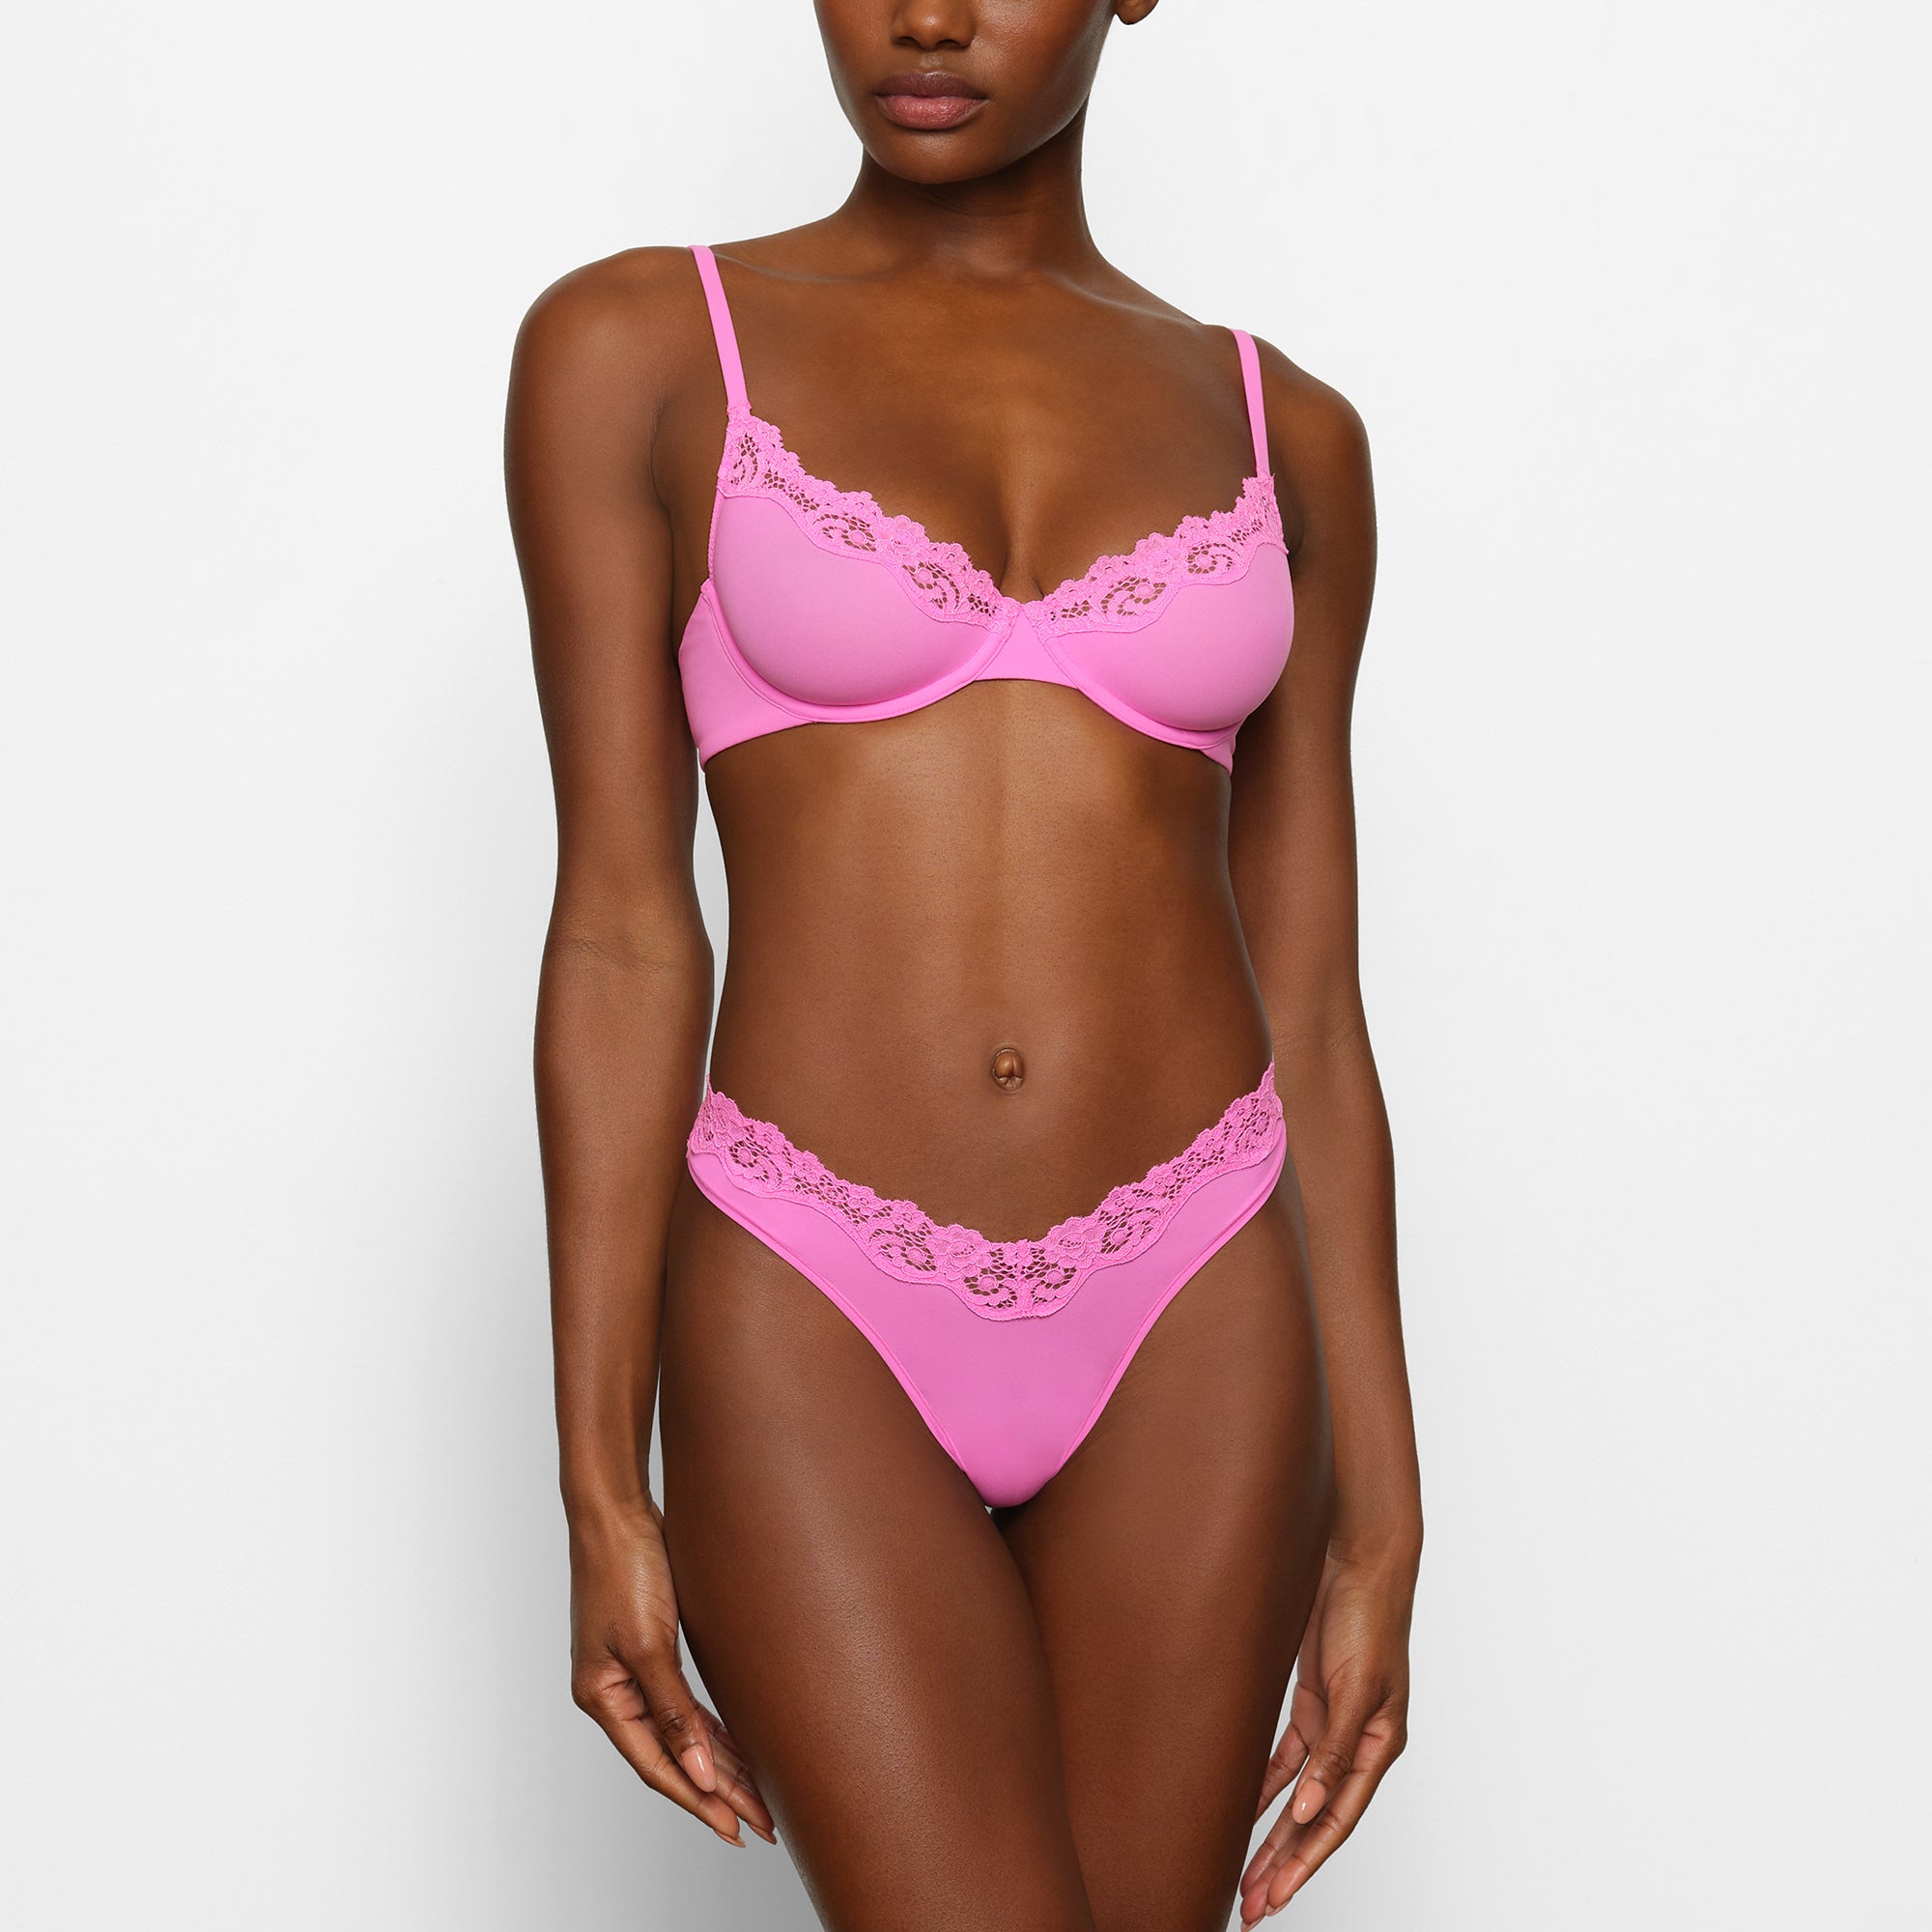 SKIMS FitsEverybody Lace Scoop Bralette In Neon Orchid - $43 New